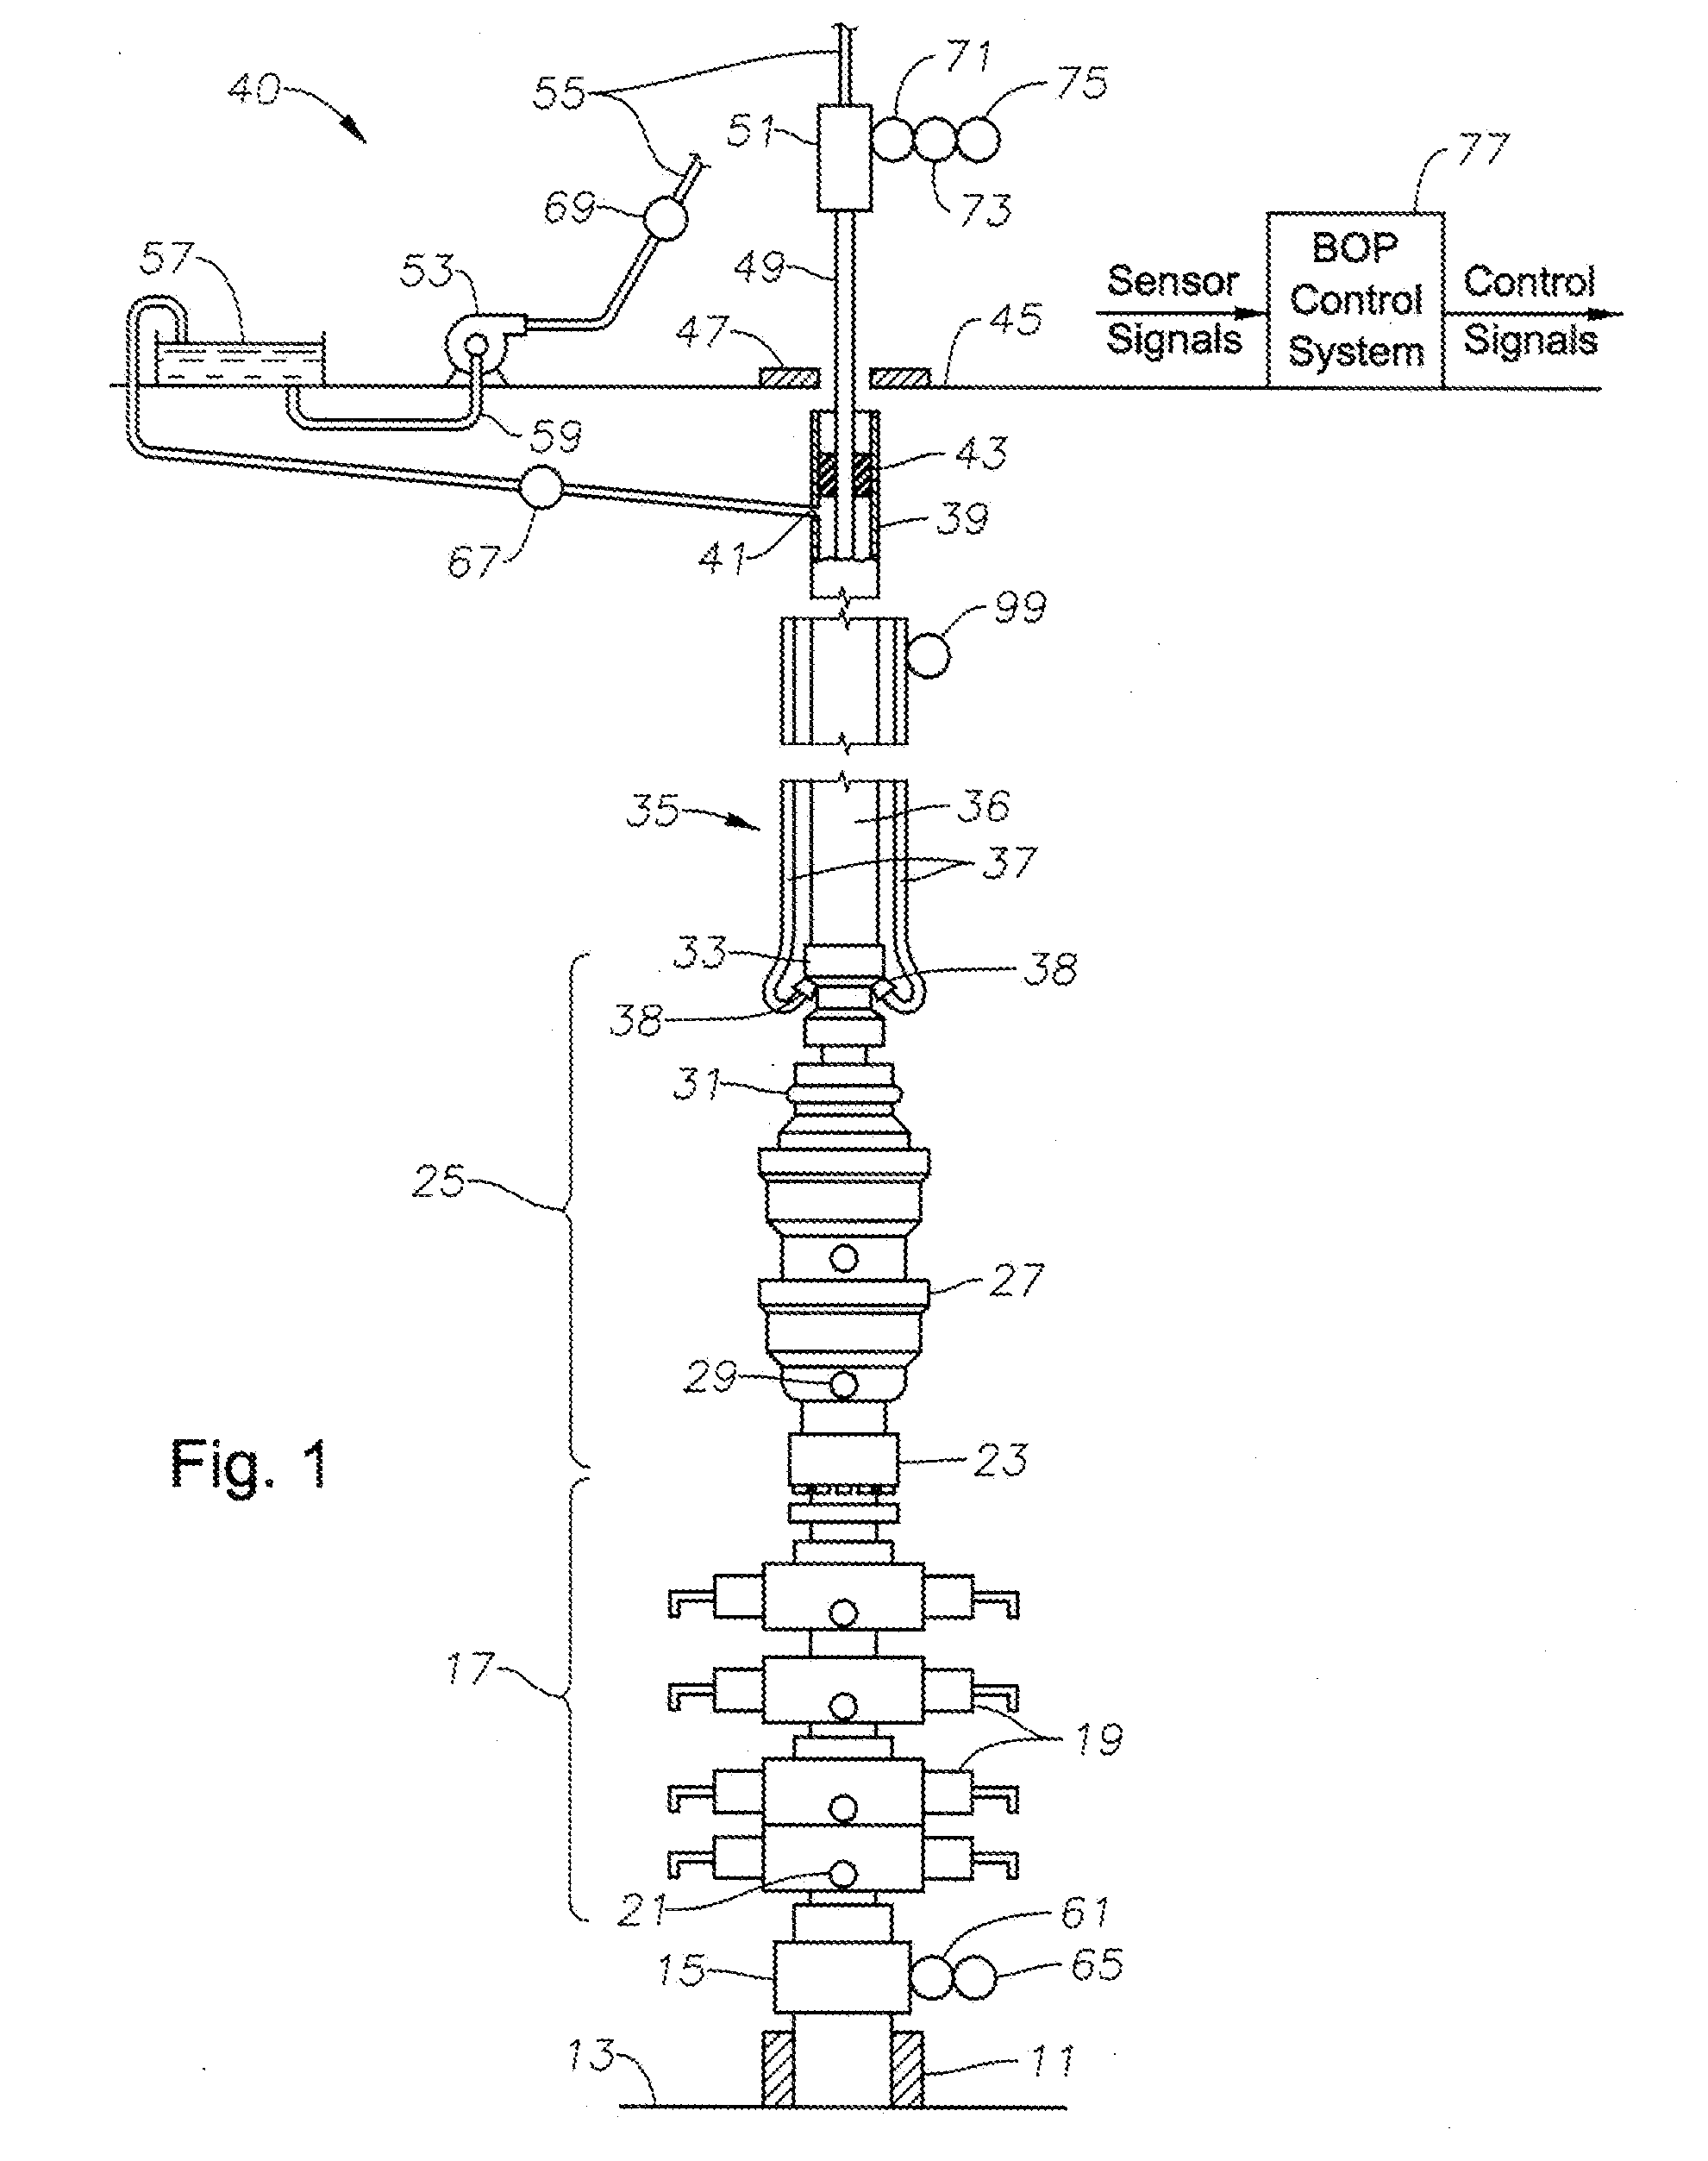 Automated Well Control Method and Apparatus